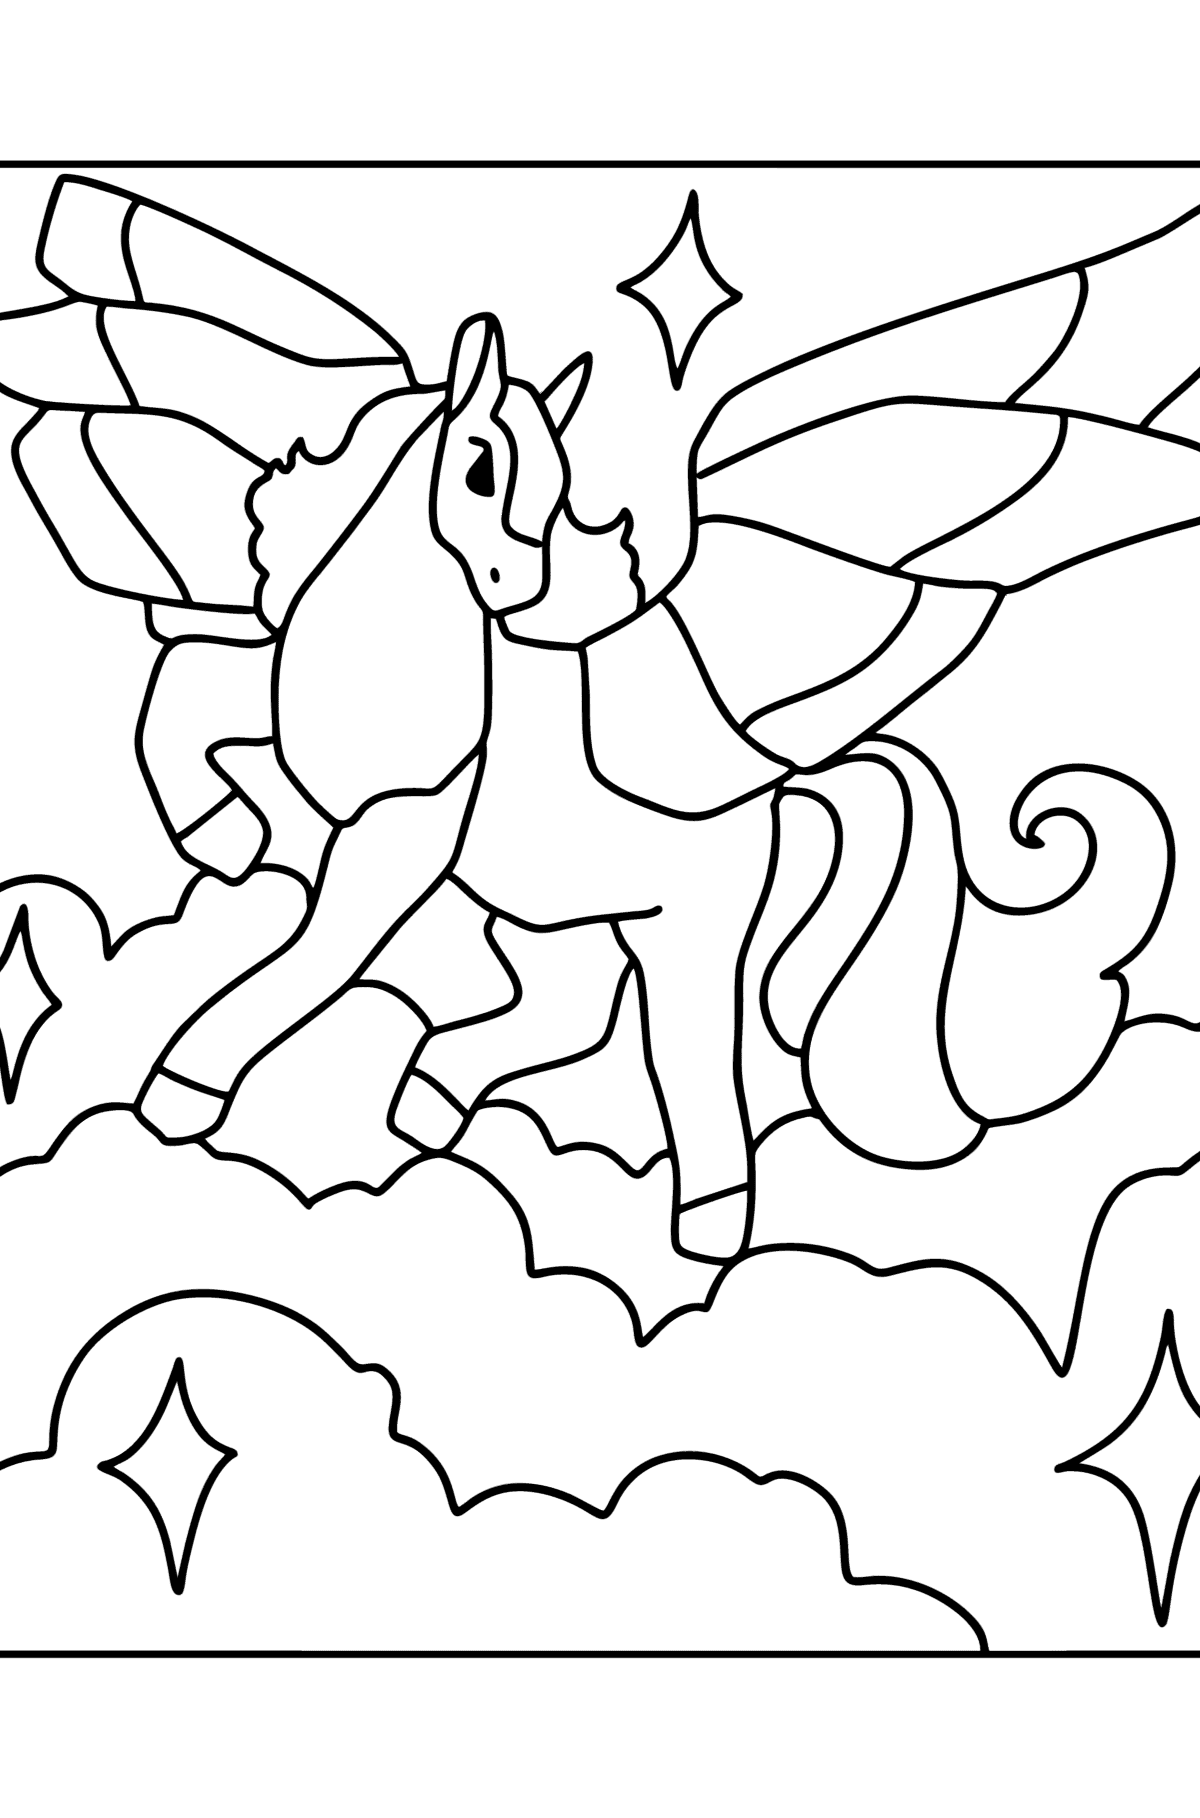 Pegasus coloring page - Coloring Pages for Kids